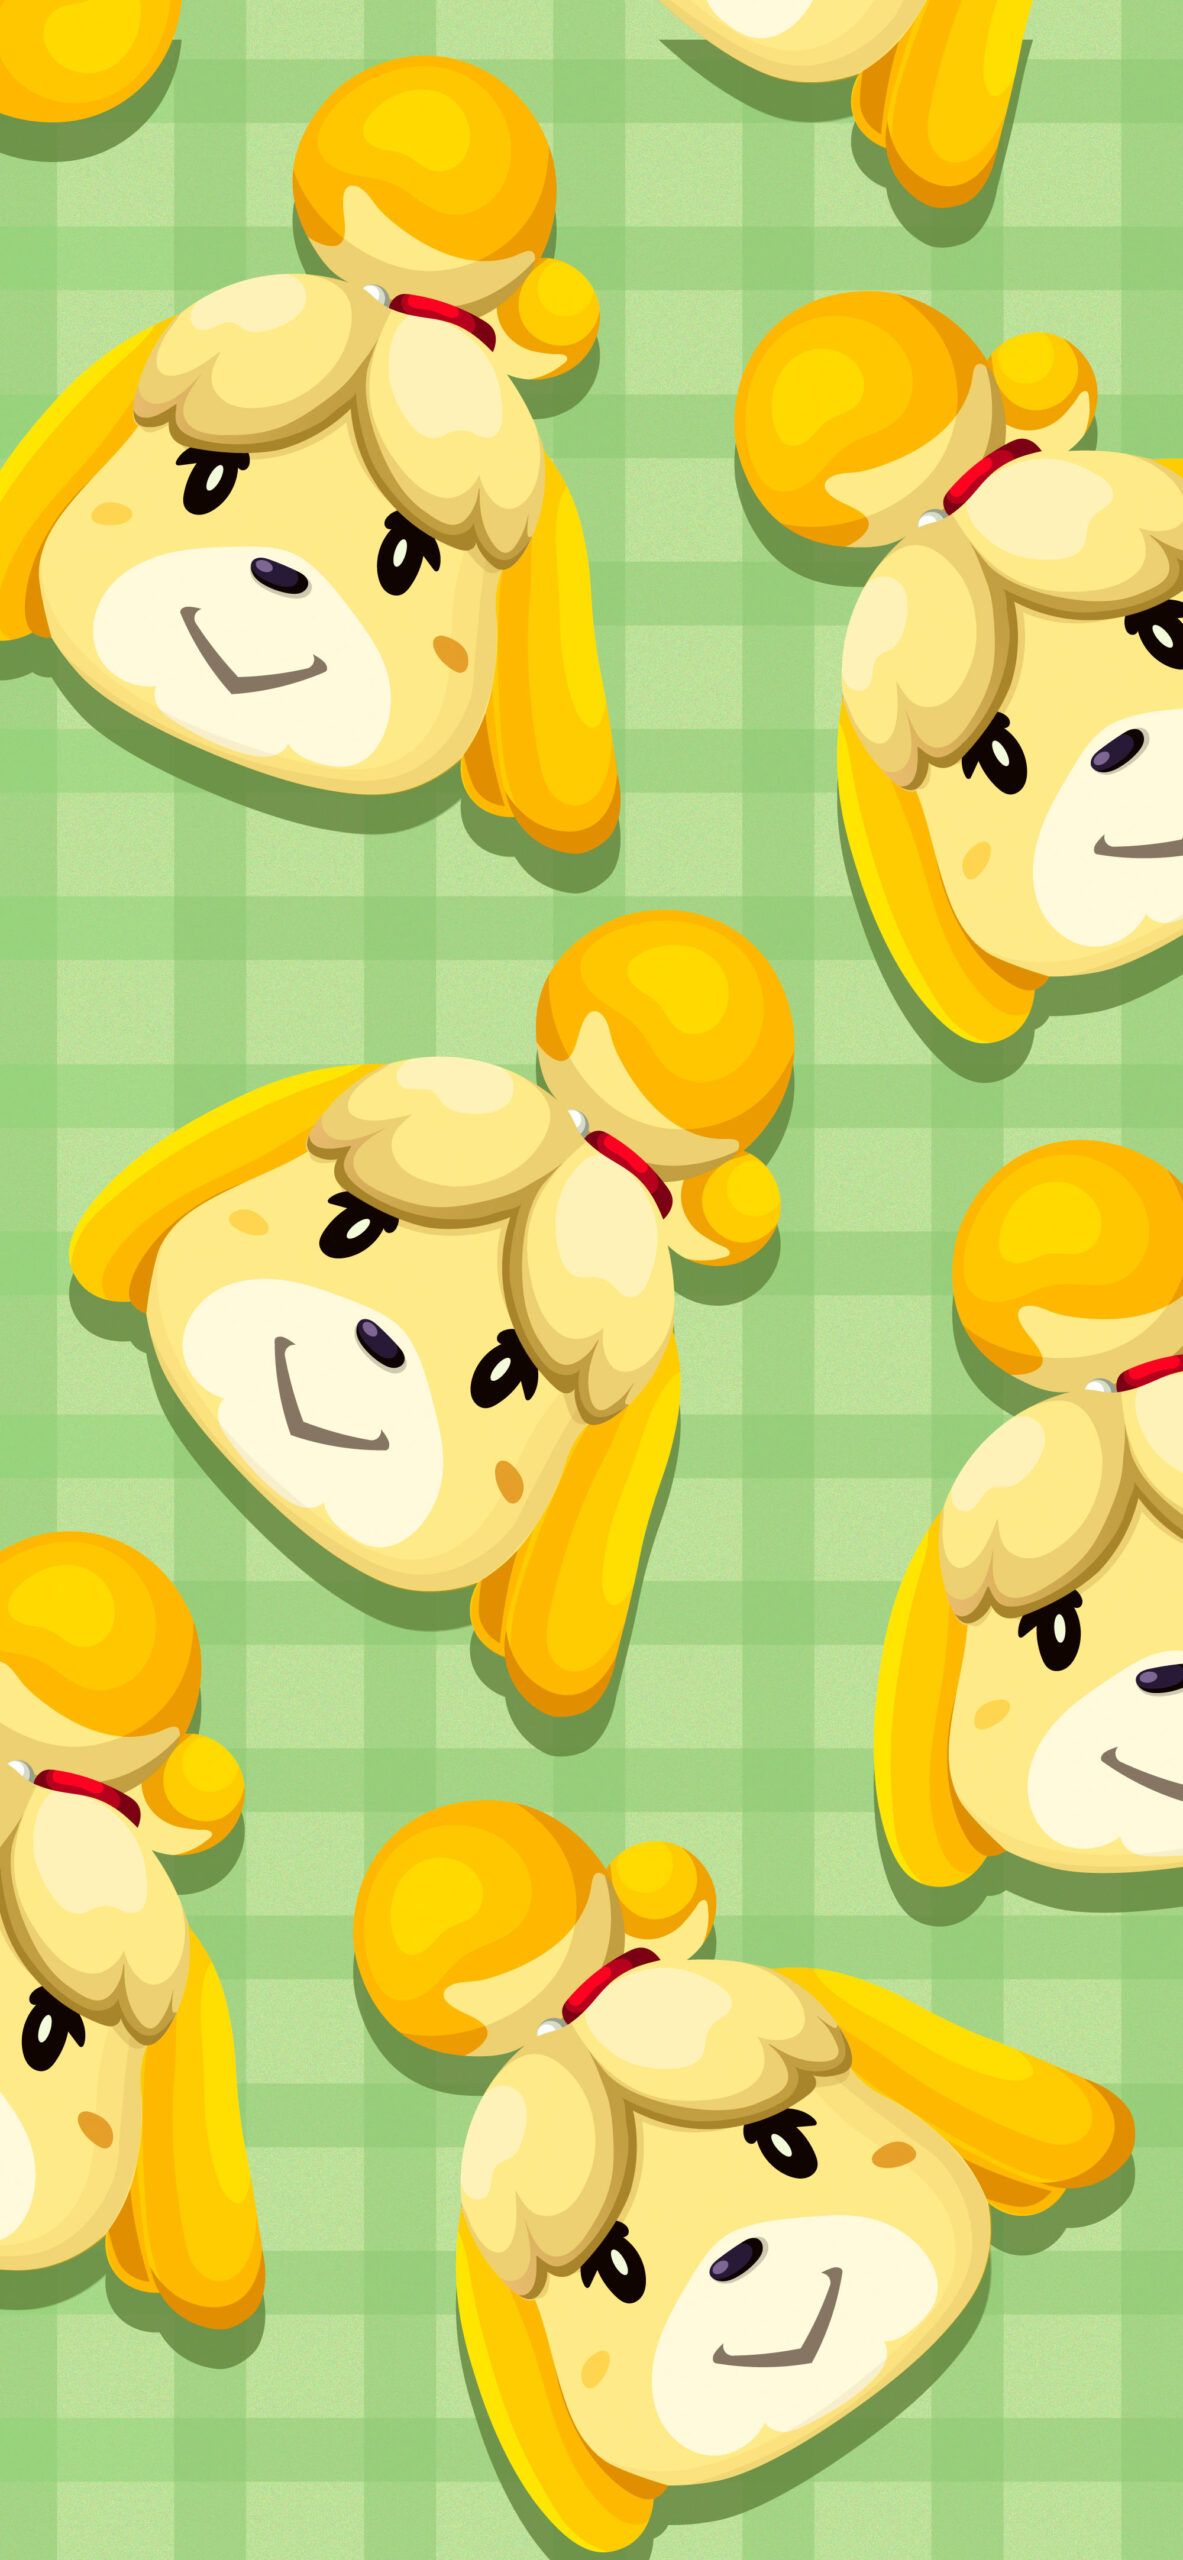 Isabelle from Animal Crossing wallpaper for iPhone and Android devices - Animal Crossing